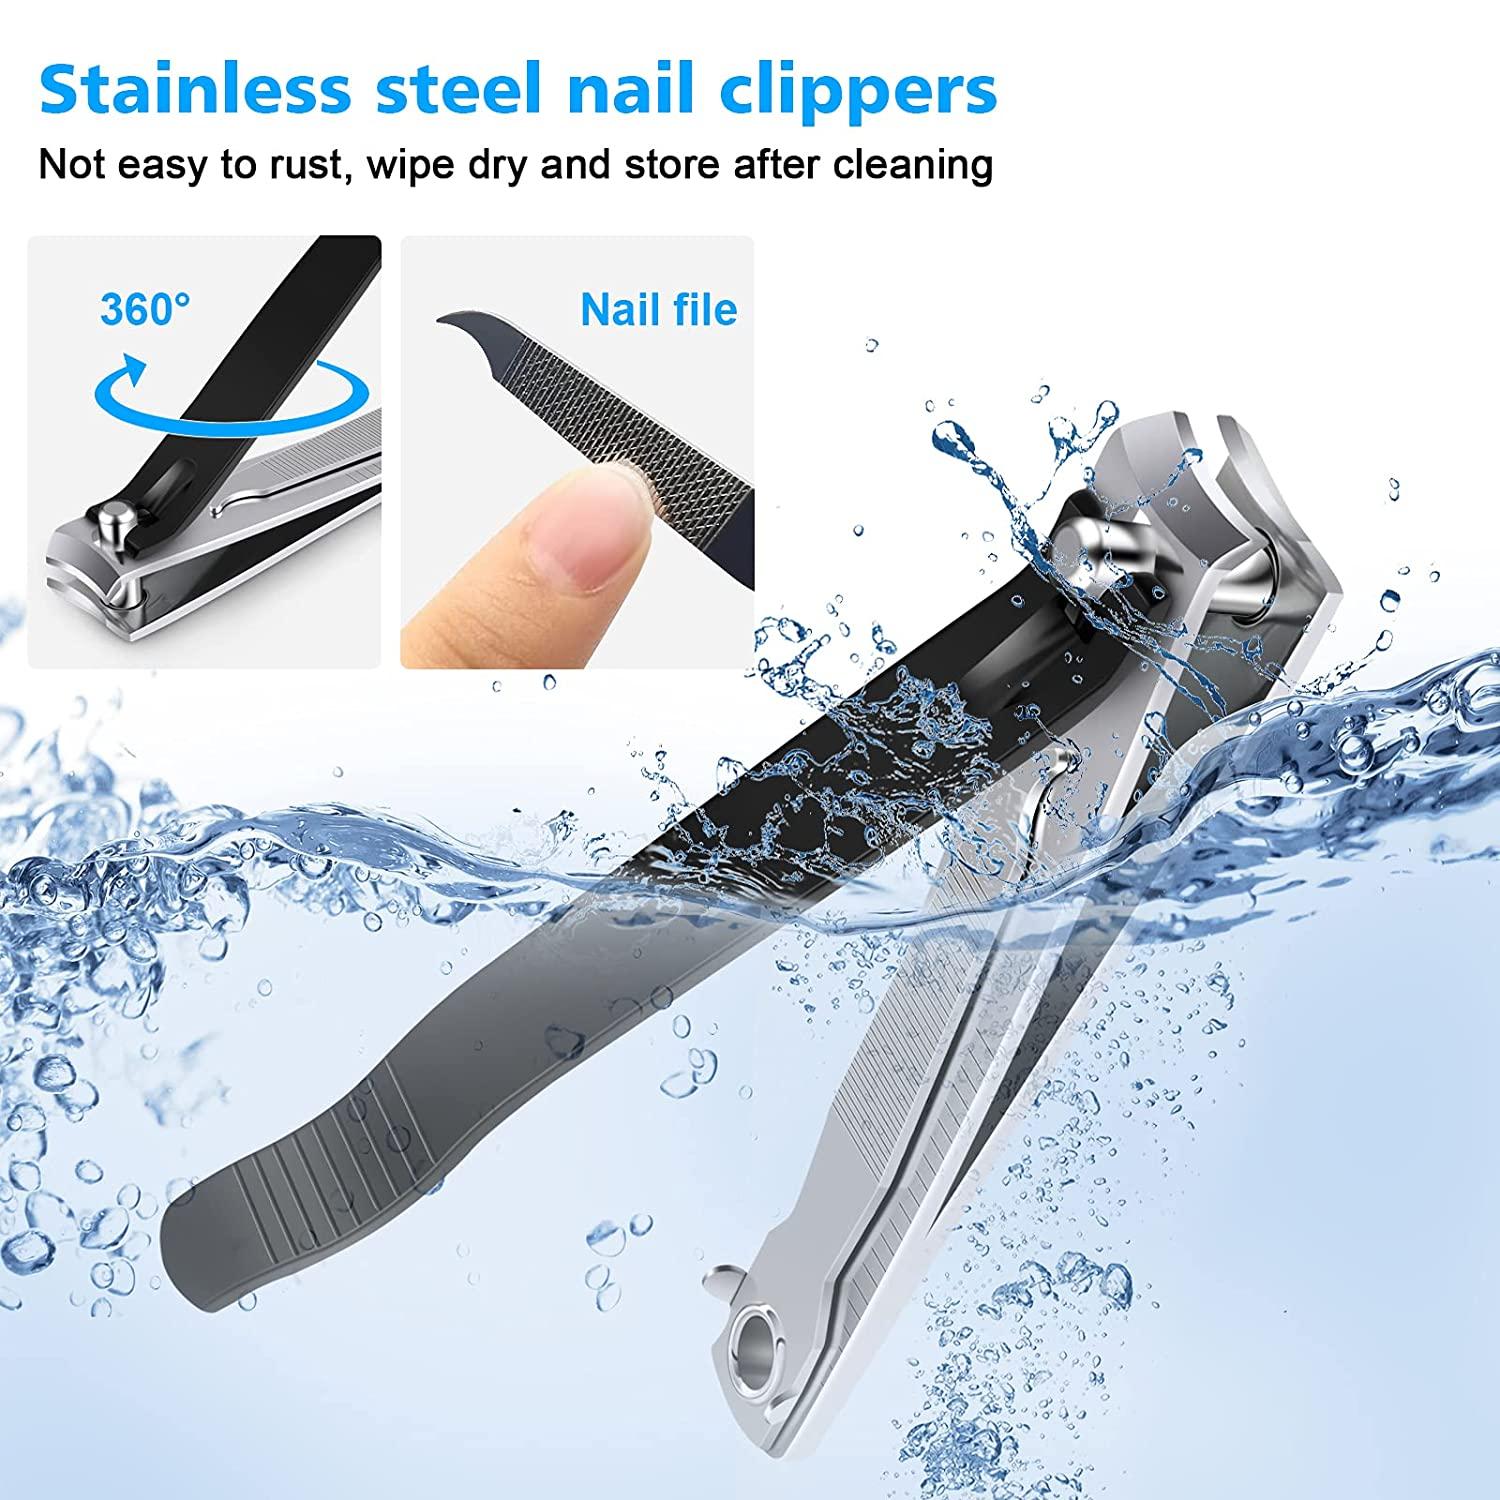 Nail Clippers Set, Sharp Stainless Steel Fingernail And Toenail